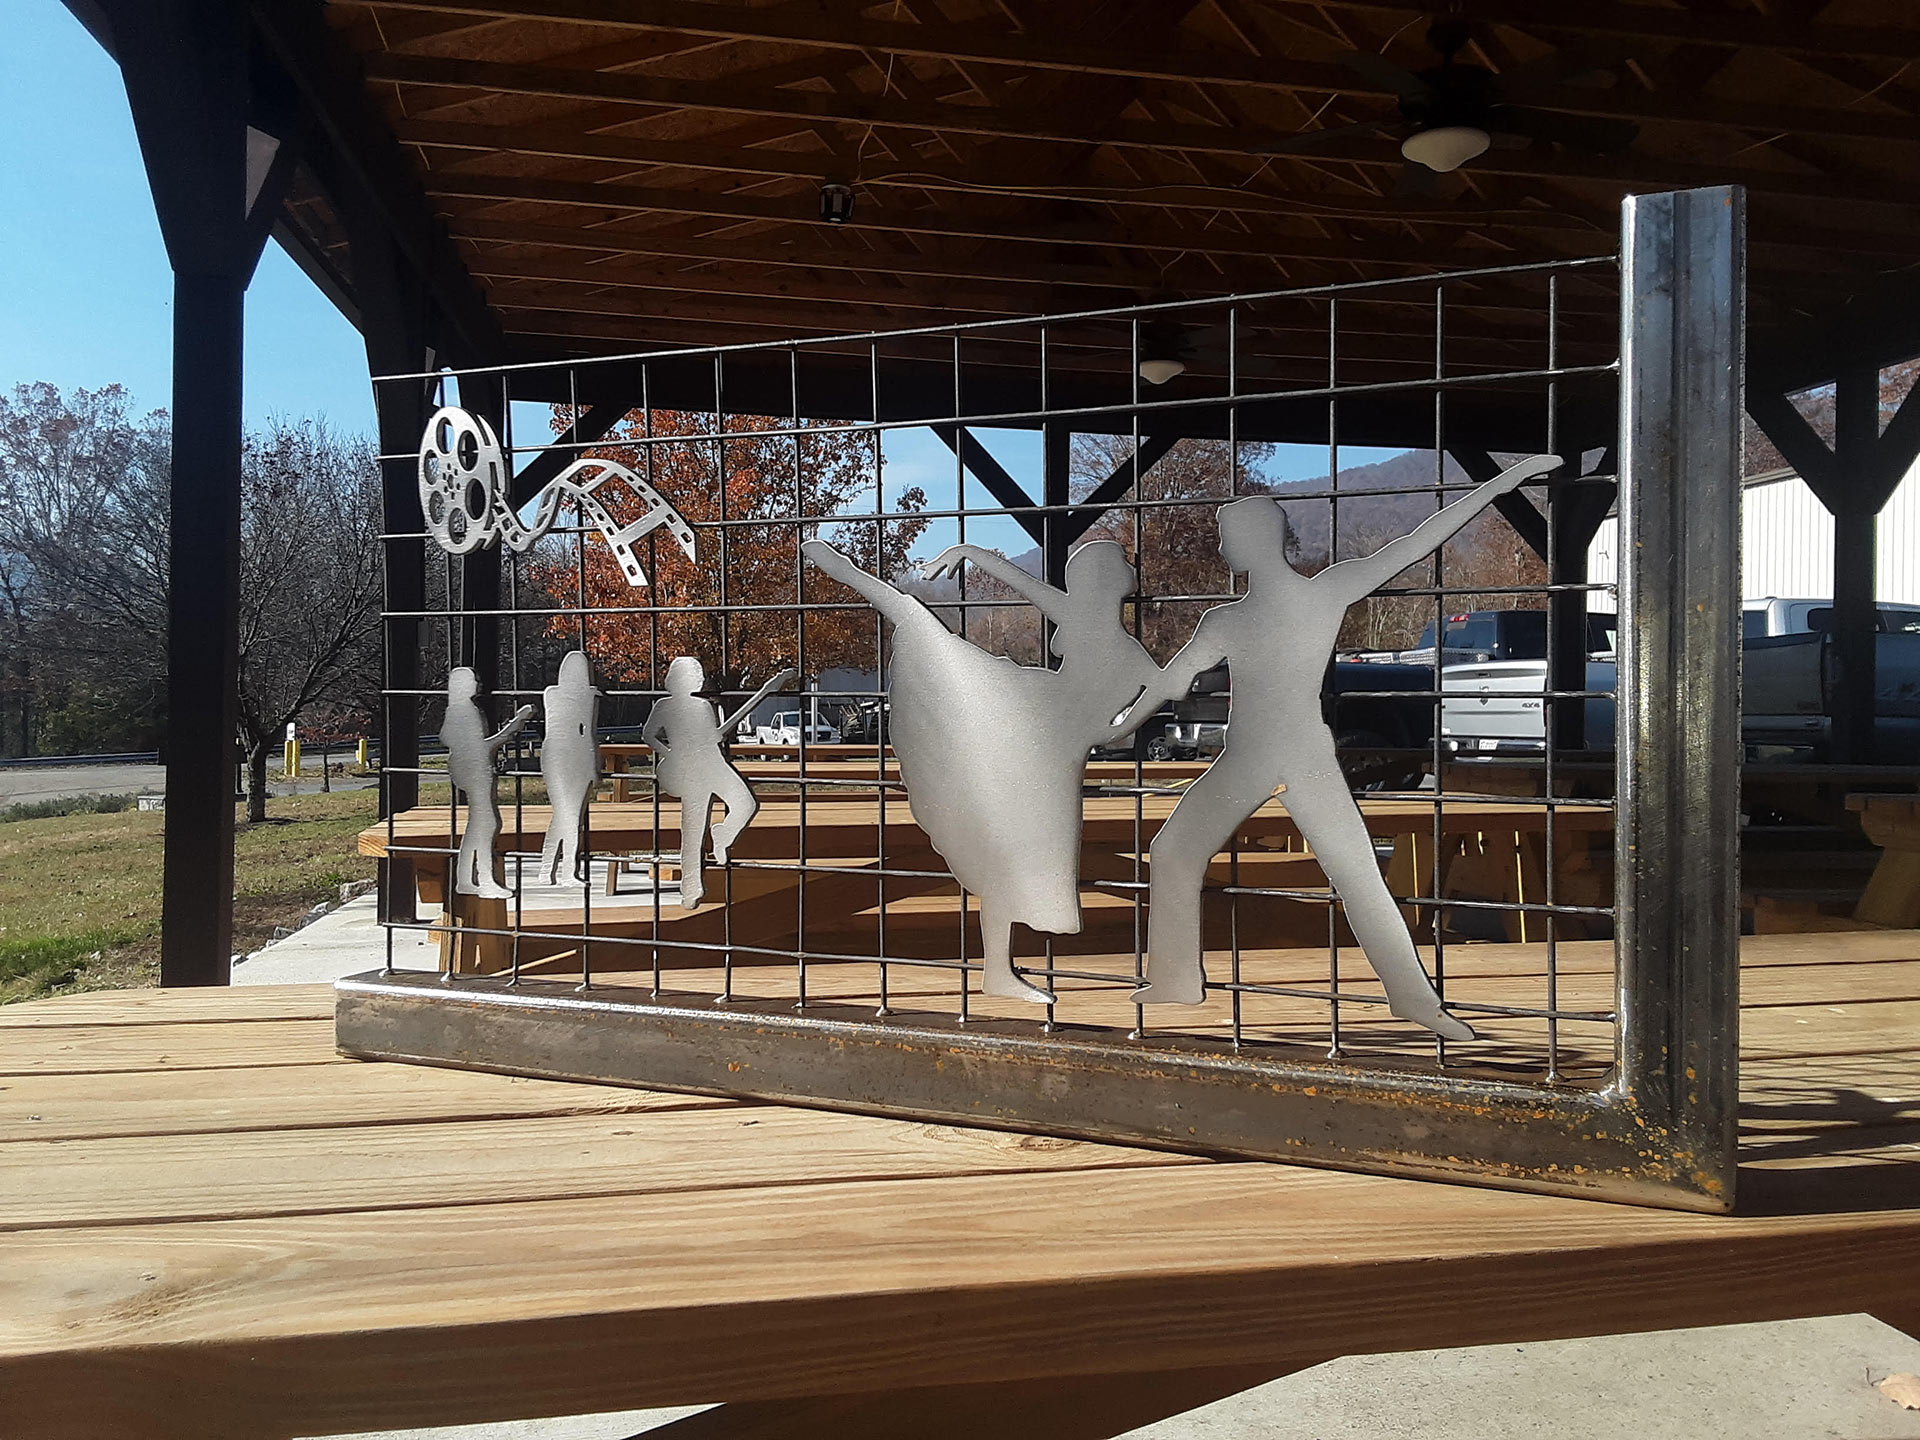 This photo is taken on the Amphitheatre grounds where the LOVE sculpture will sit. The sculpture will have the perfect backdrop of trees, foliage, Smith Creek.  It will be accessible by using the Amphitheatre Bridge or by parking on Church Street and walking to the sign.  Both are ADA compliant.